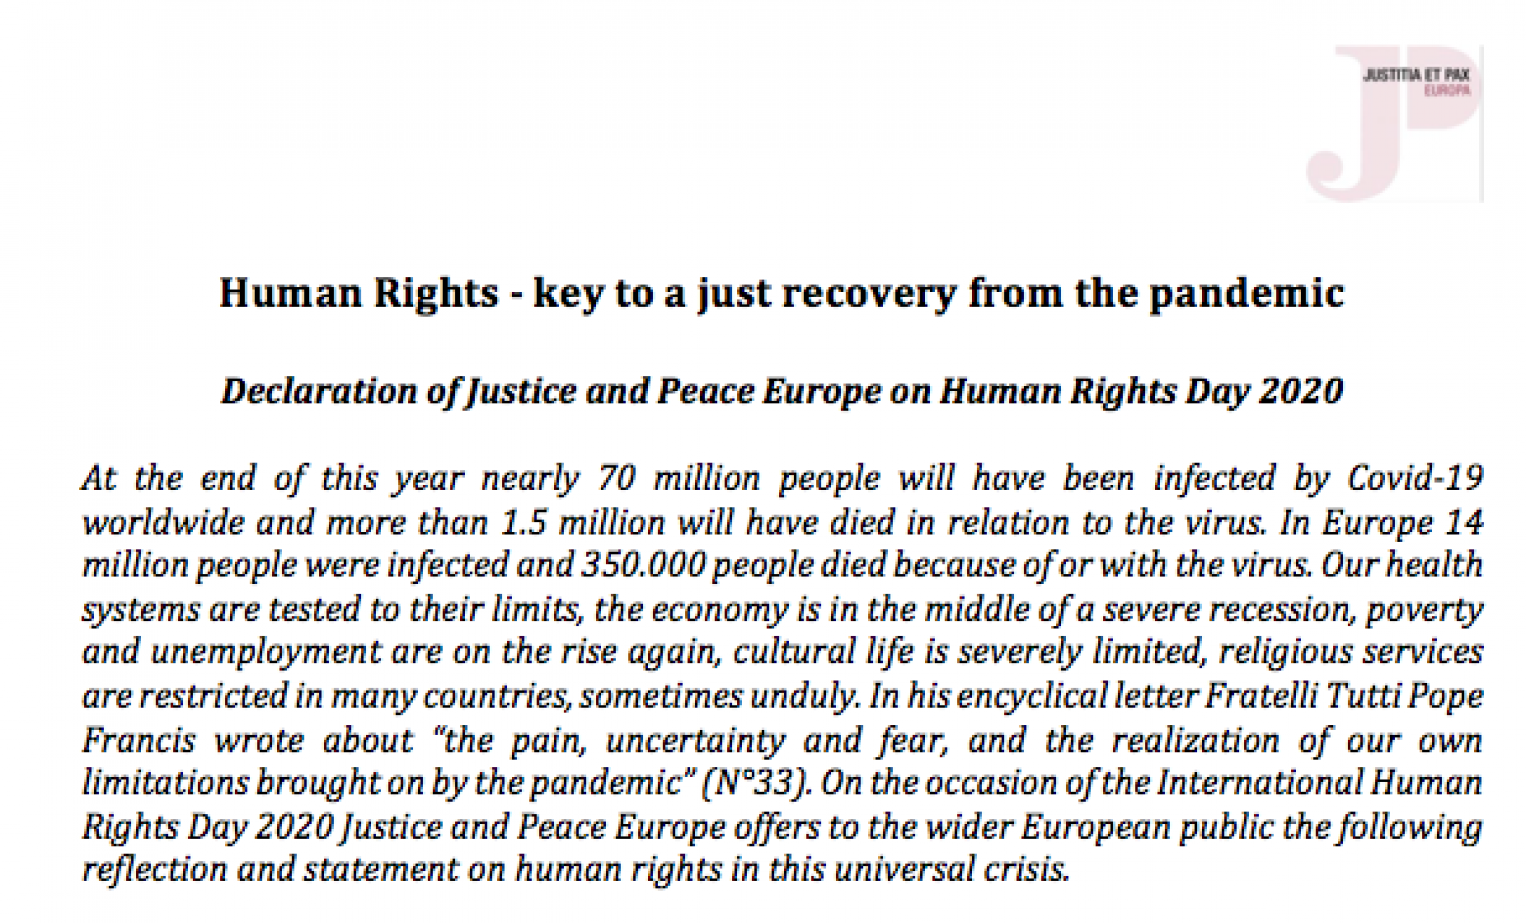 Human Rights - key to a just recovery from the pandemic